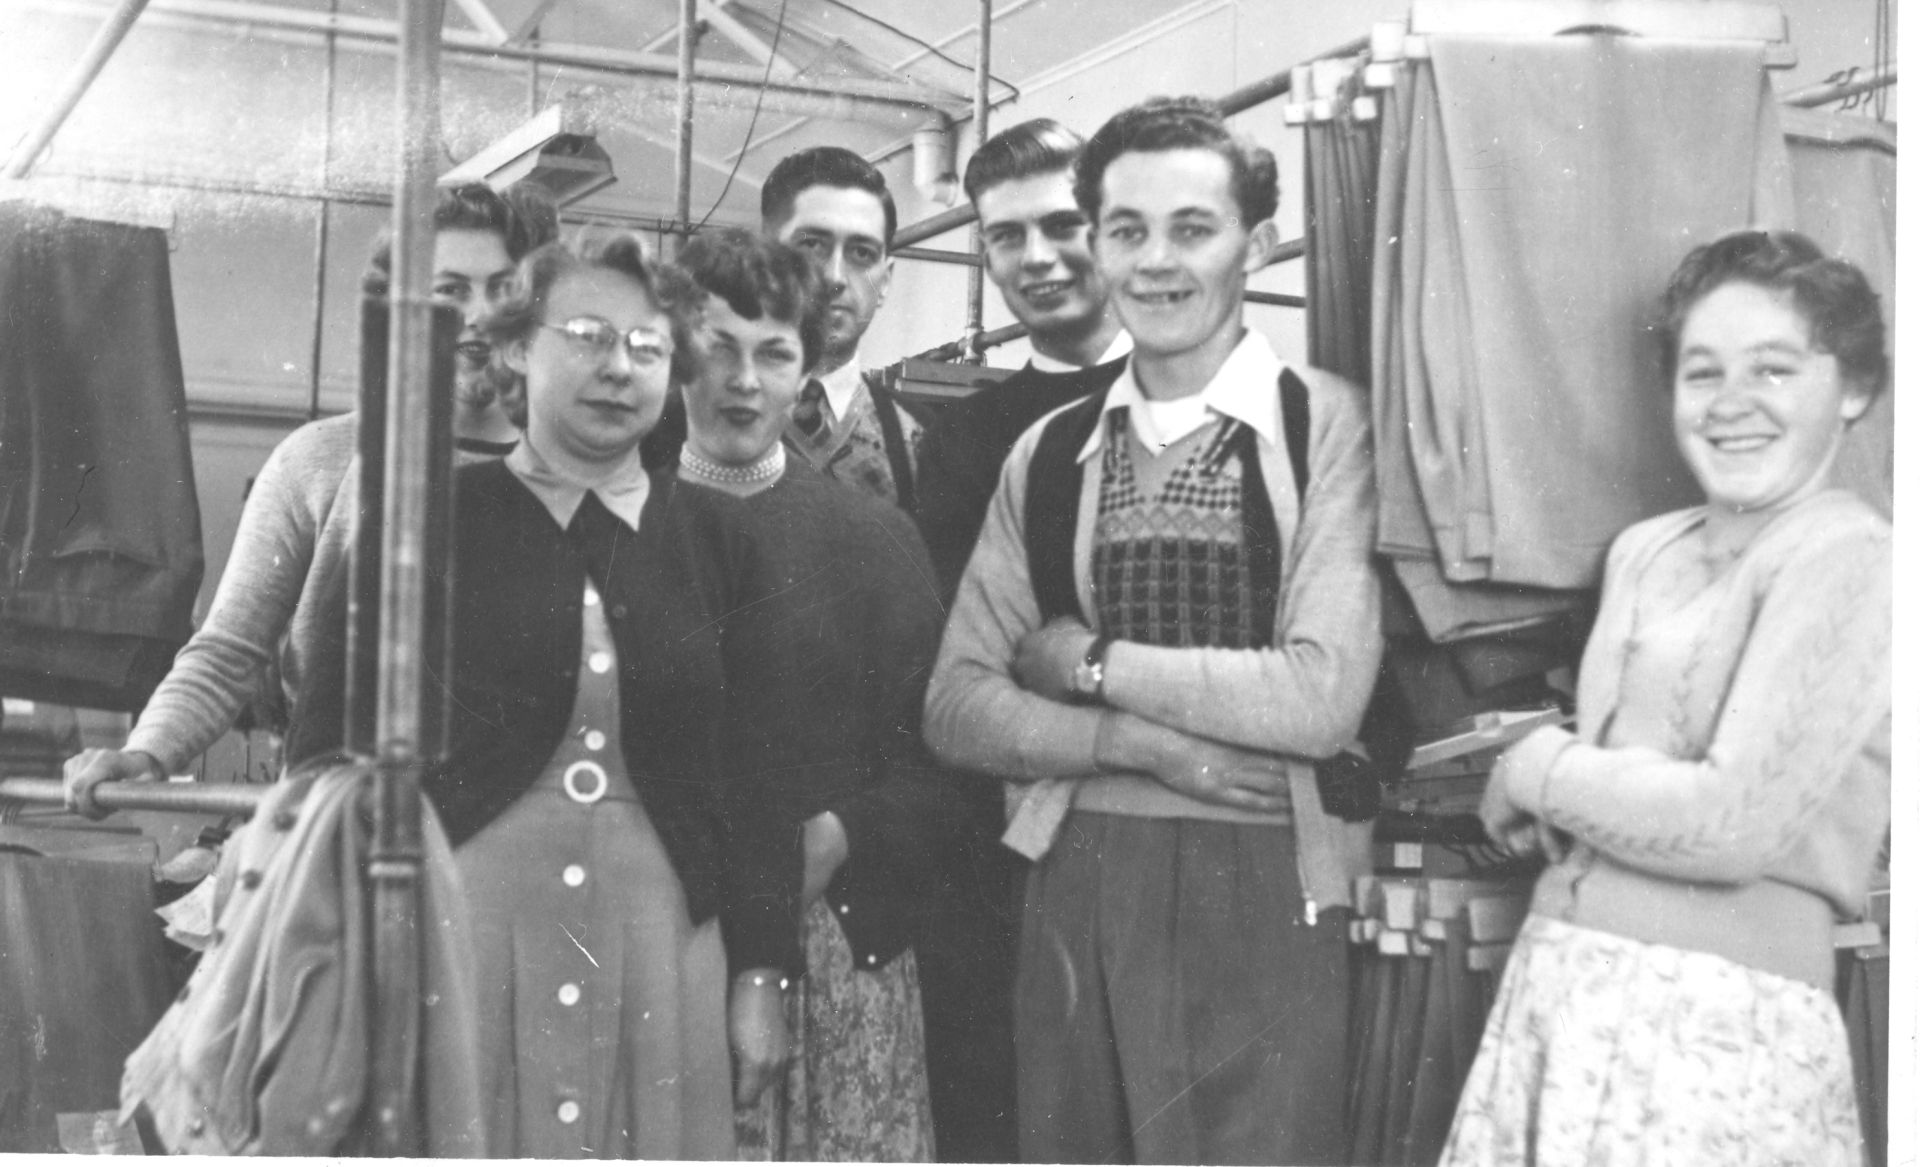 Staff in Dry Cleaning and Aftersales 1953. L-R Edith, Mavis, Cathy, Alec Barber, Geoff, Lawson Ryan and Dulcie Cocking.  Photo Jones Family Collection 